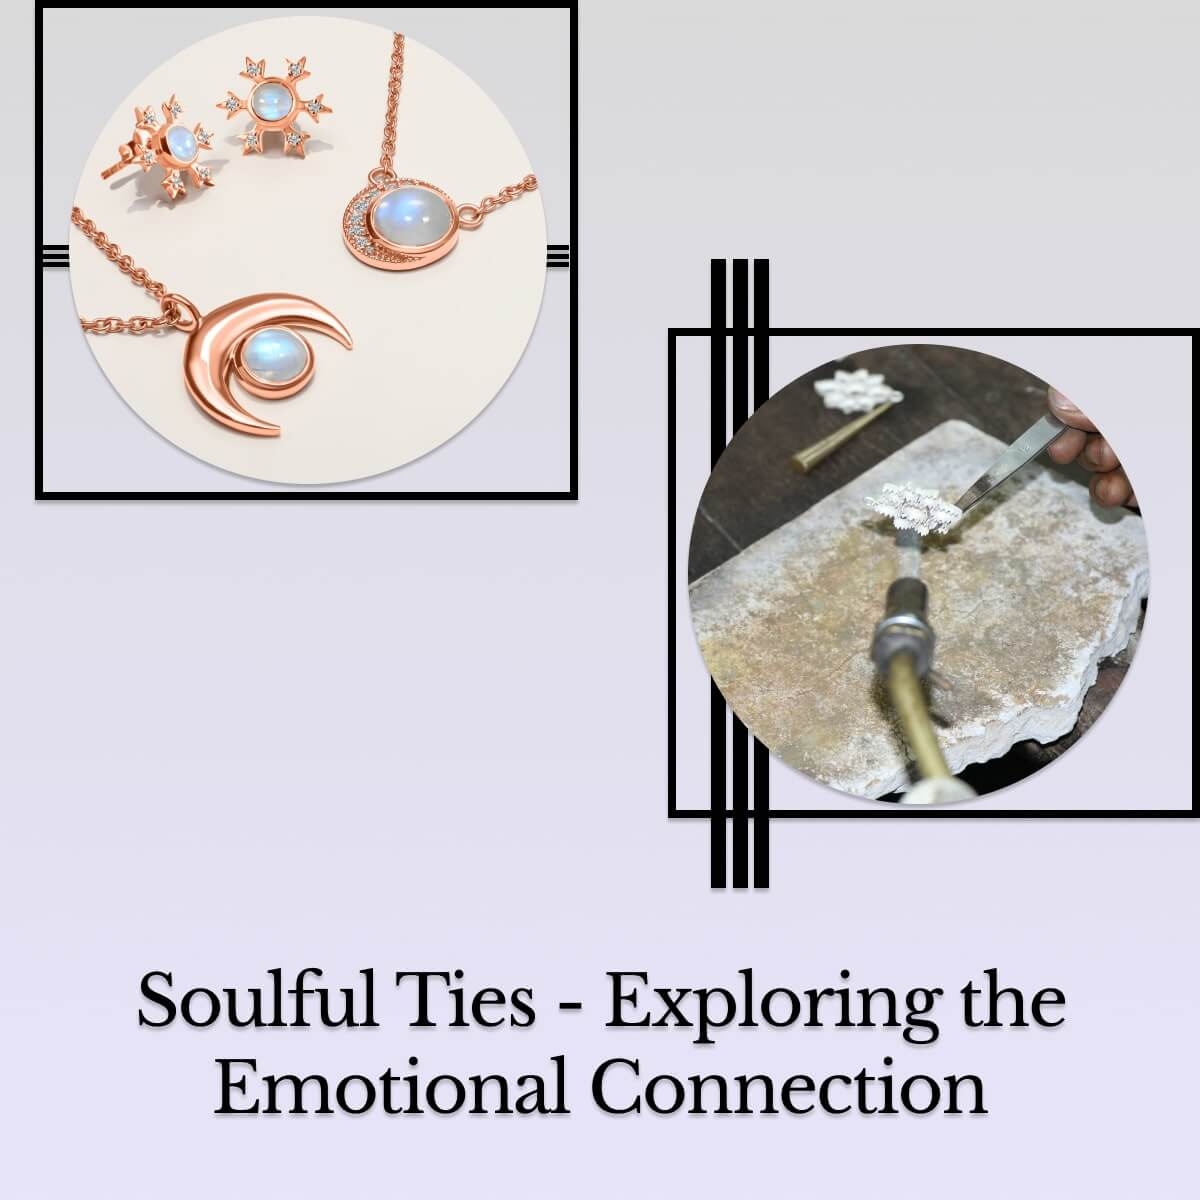 The Emotional Connection